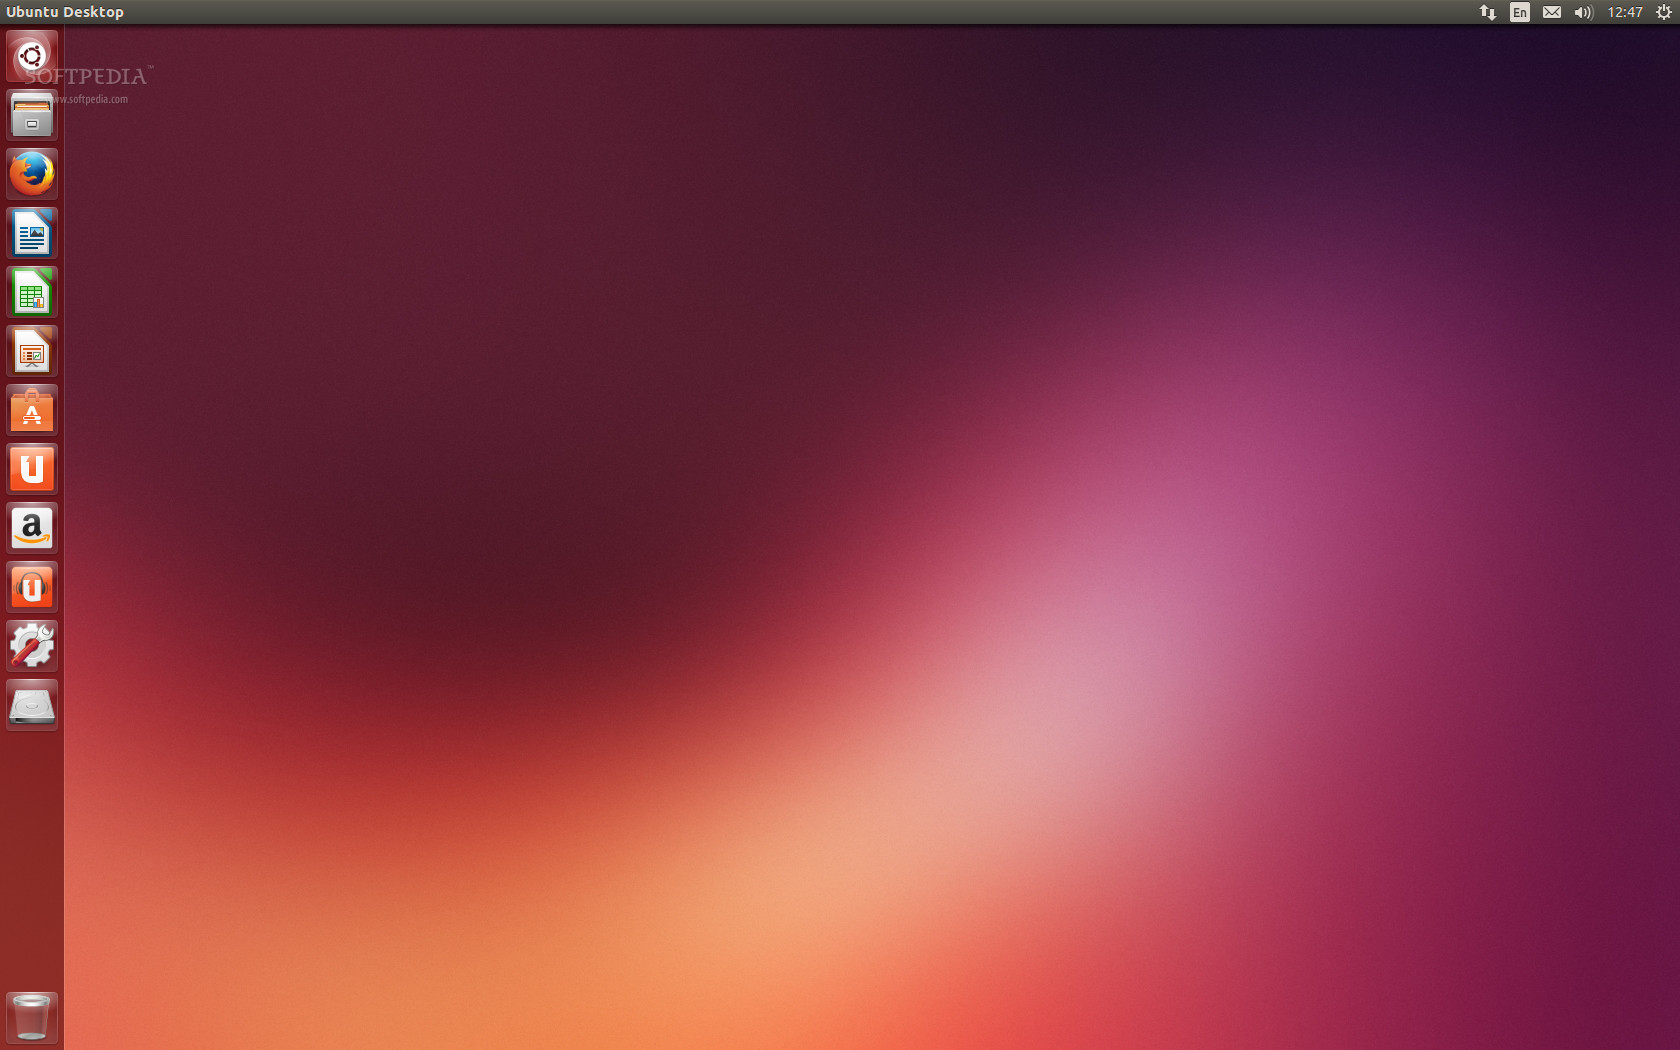 Ubuntu Lts Might Seem Very Far Away For The People Who Are